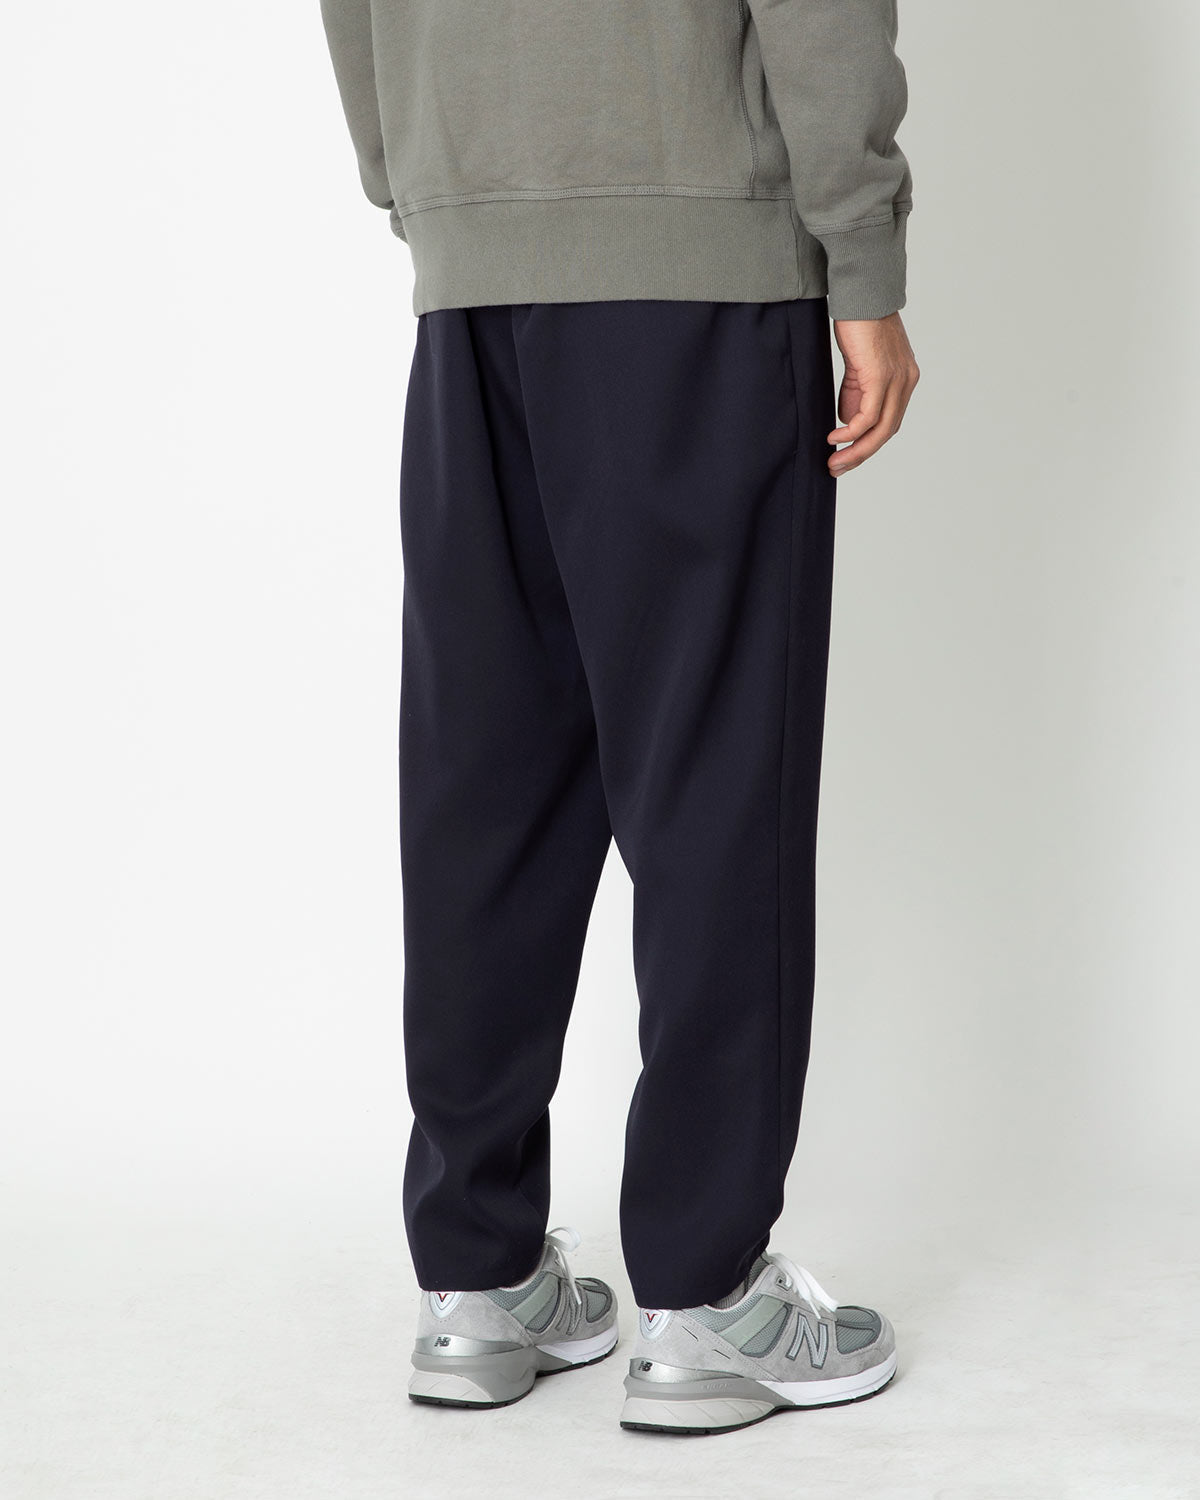 SCALE OFF WOOL CHEF PANTS